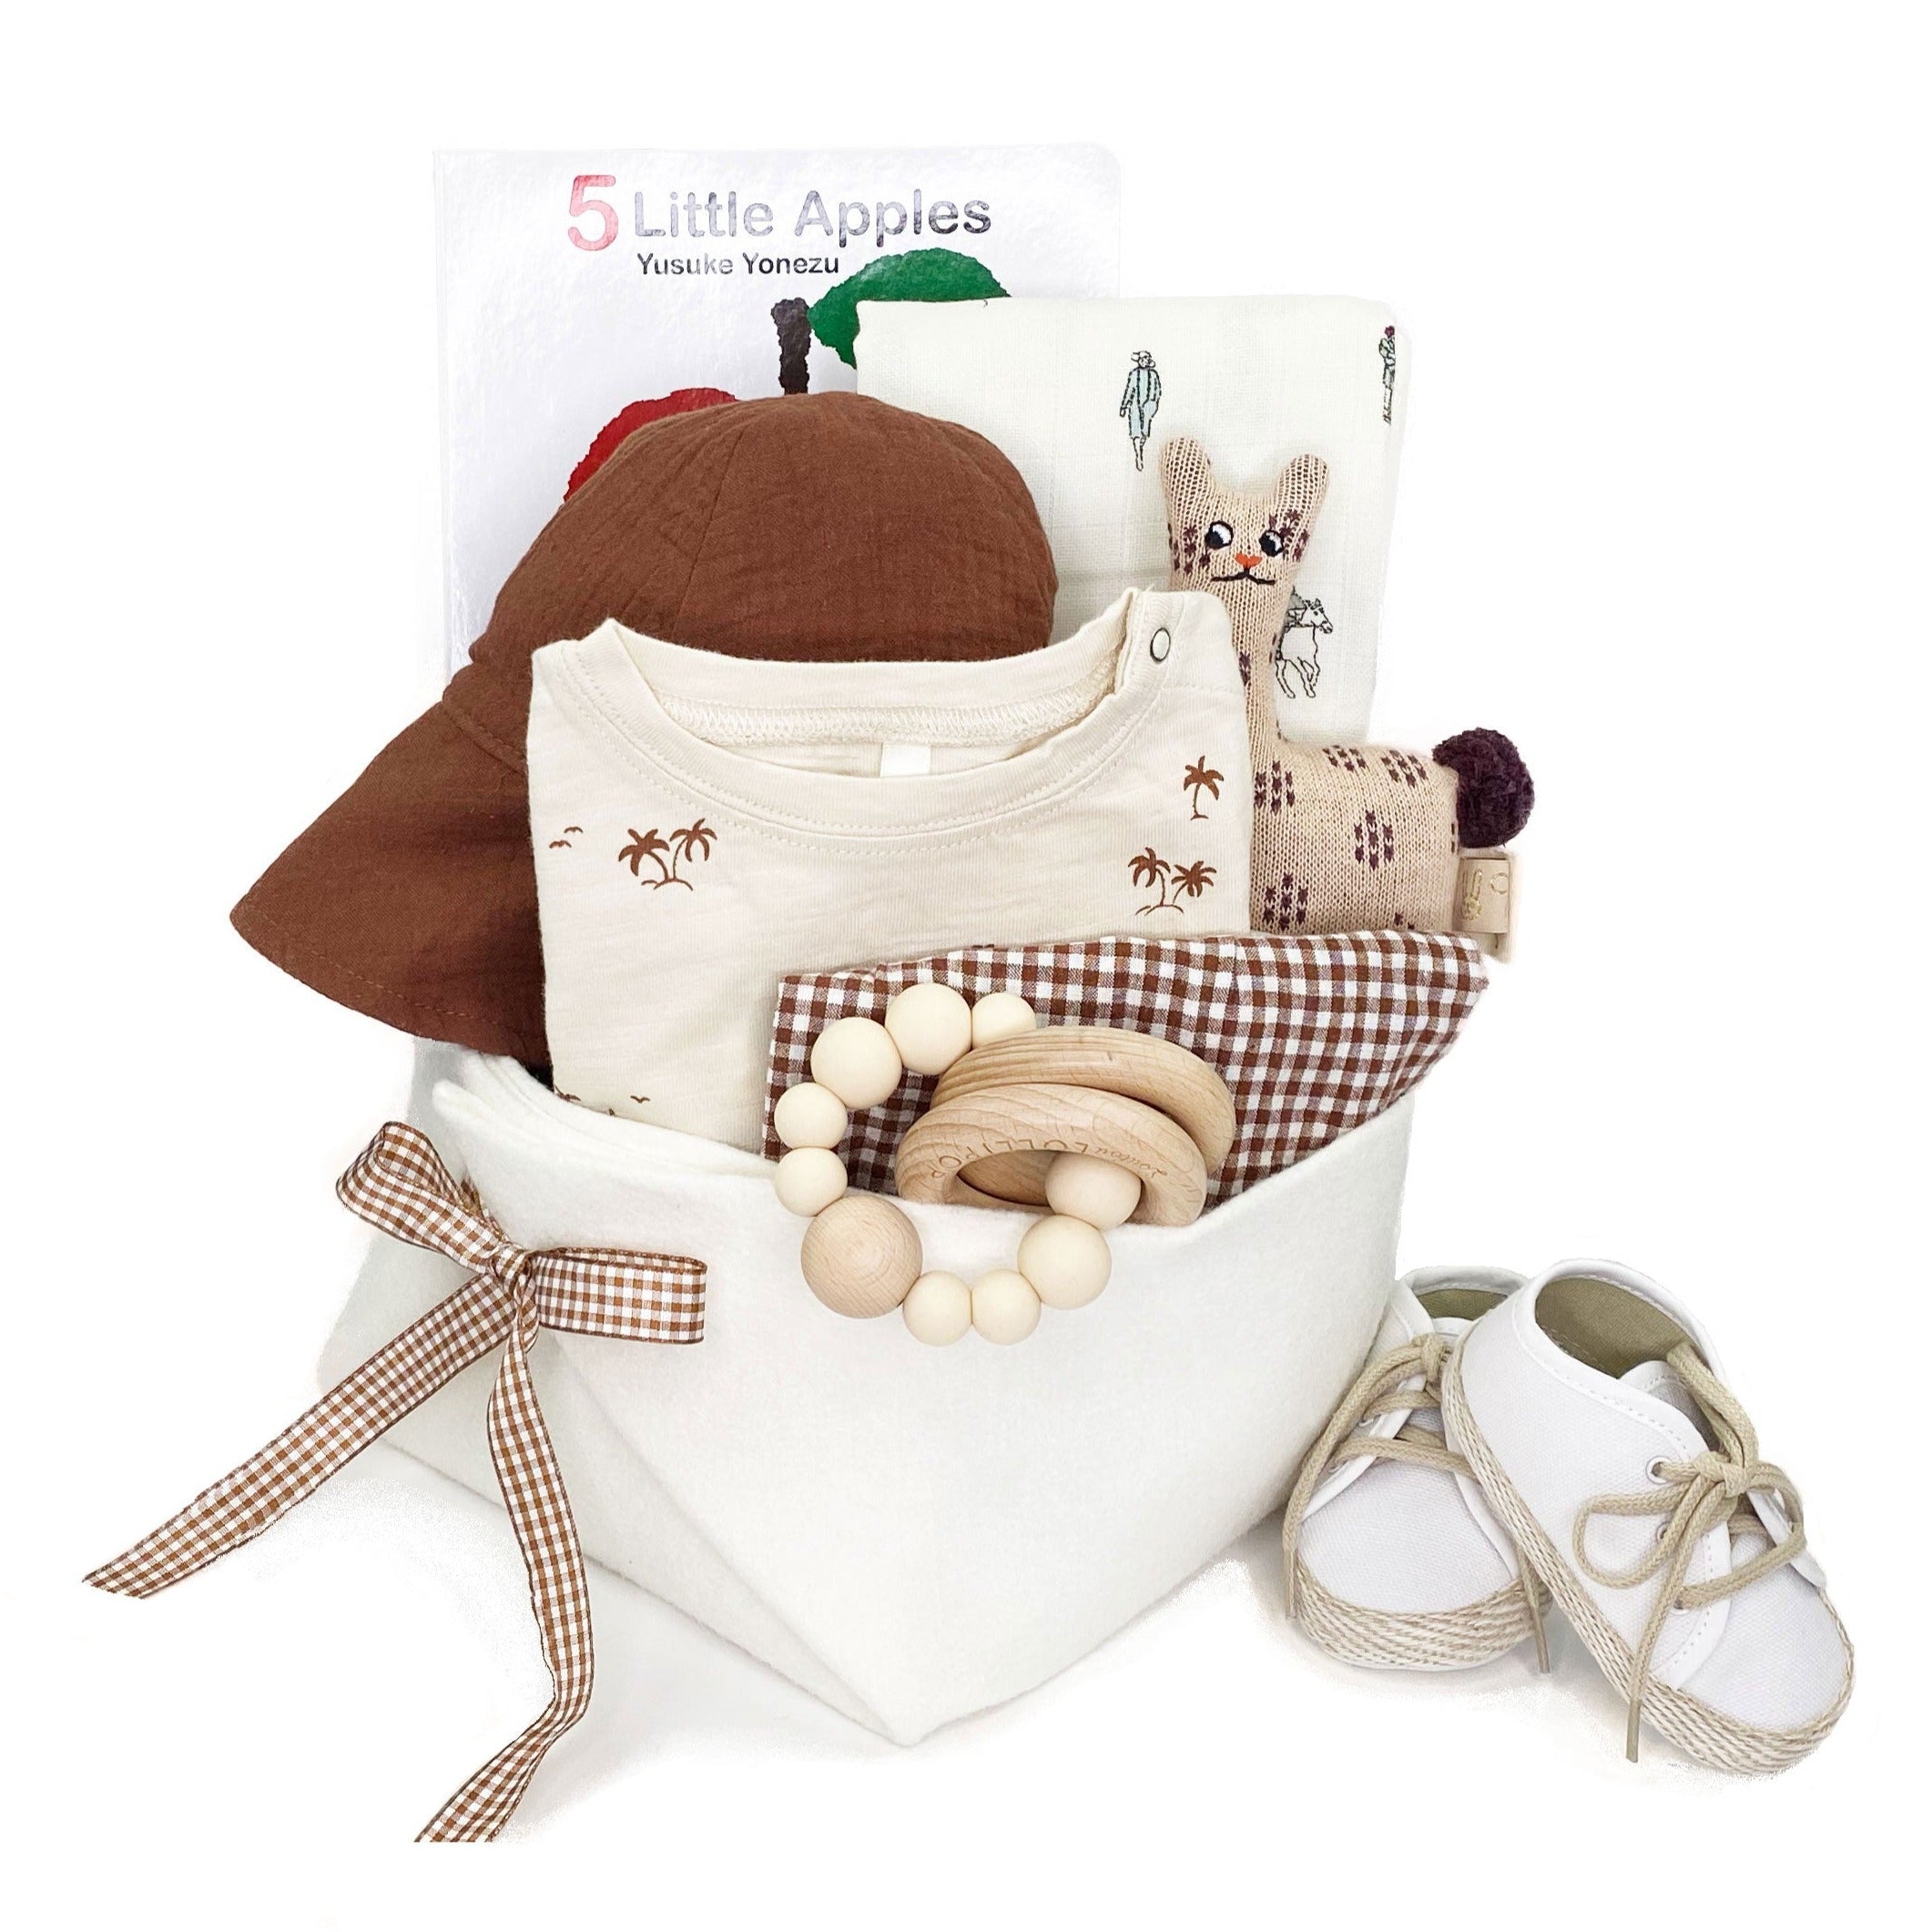 Baby Gift Basket featuring Rylee and Cru fashion and curated accessories from the best designers in the world at Bonjour Baby Baskets